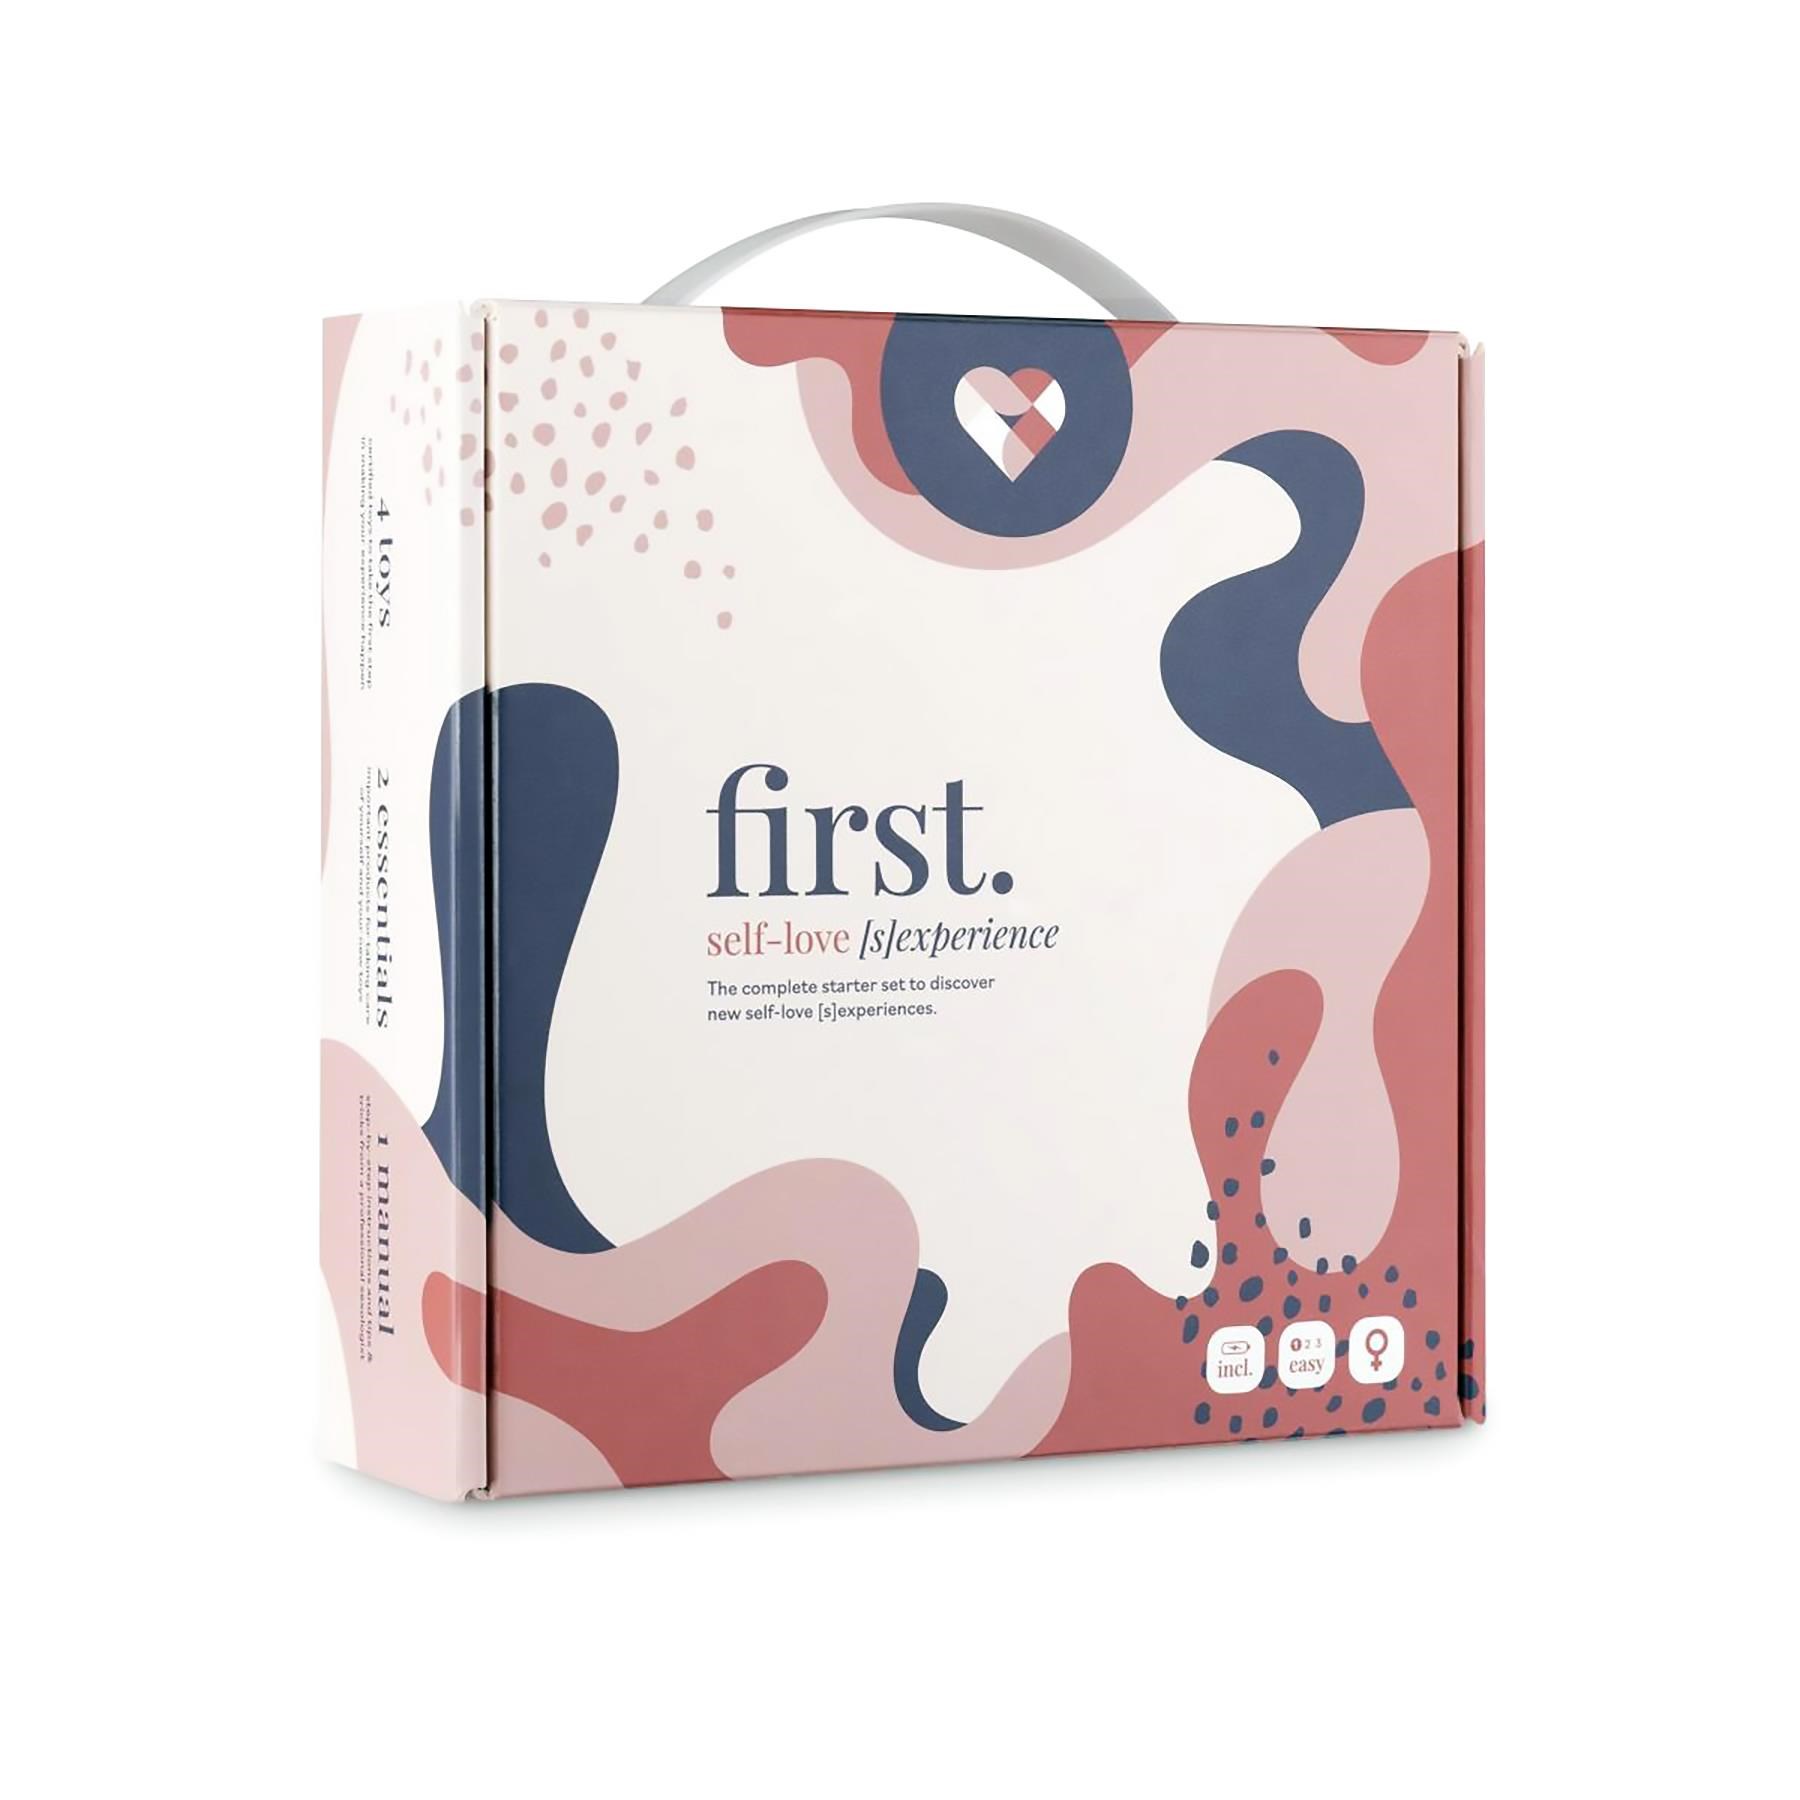 LoveBoxxx First Self Love Experience Starter Set - Packaging - Front